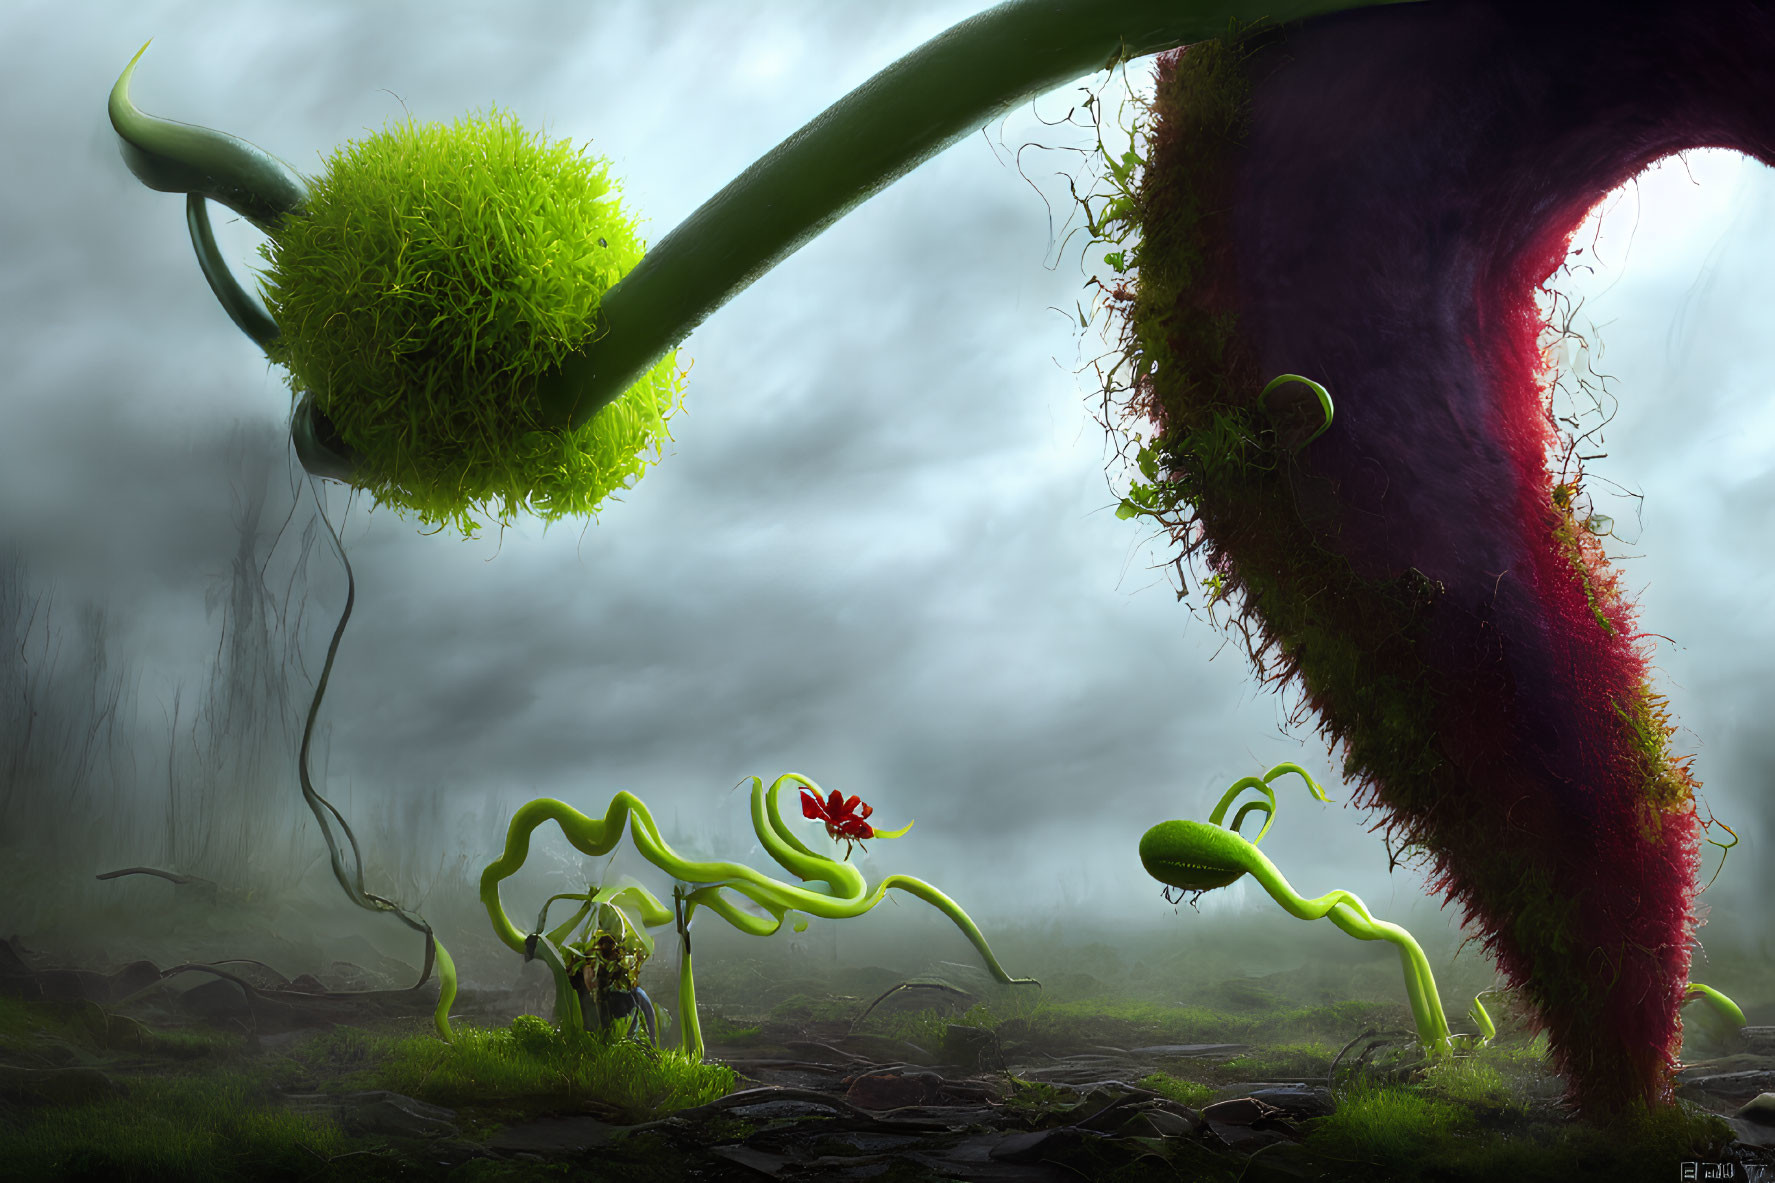 Fantastical landscape with oversized alien plant life and fuzzy pod